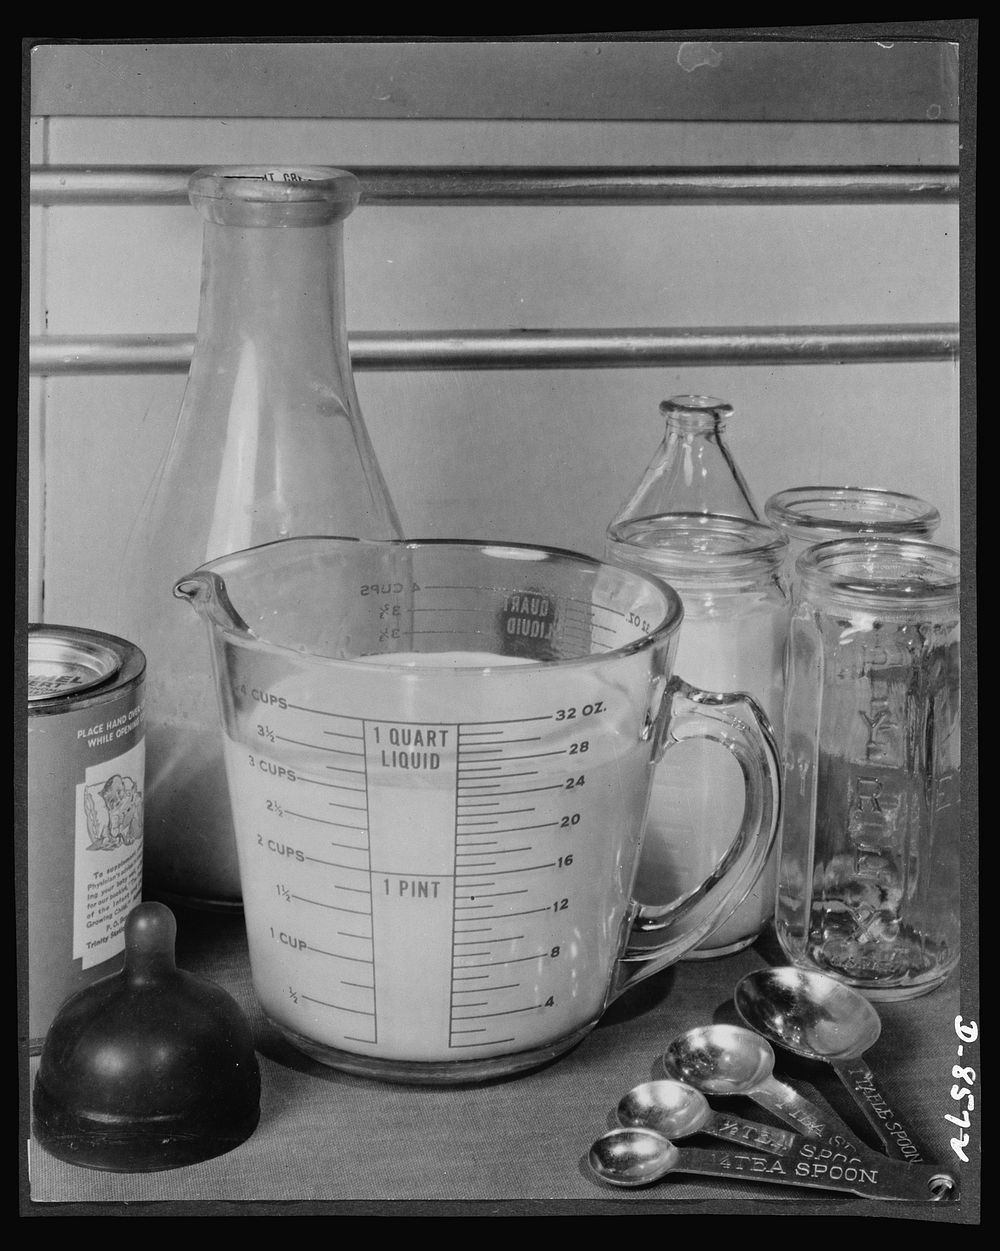 Substitute materials. Glass utensils. New type glass measuring cups have easy-to-read markings. The quart measuring cup…